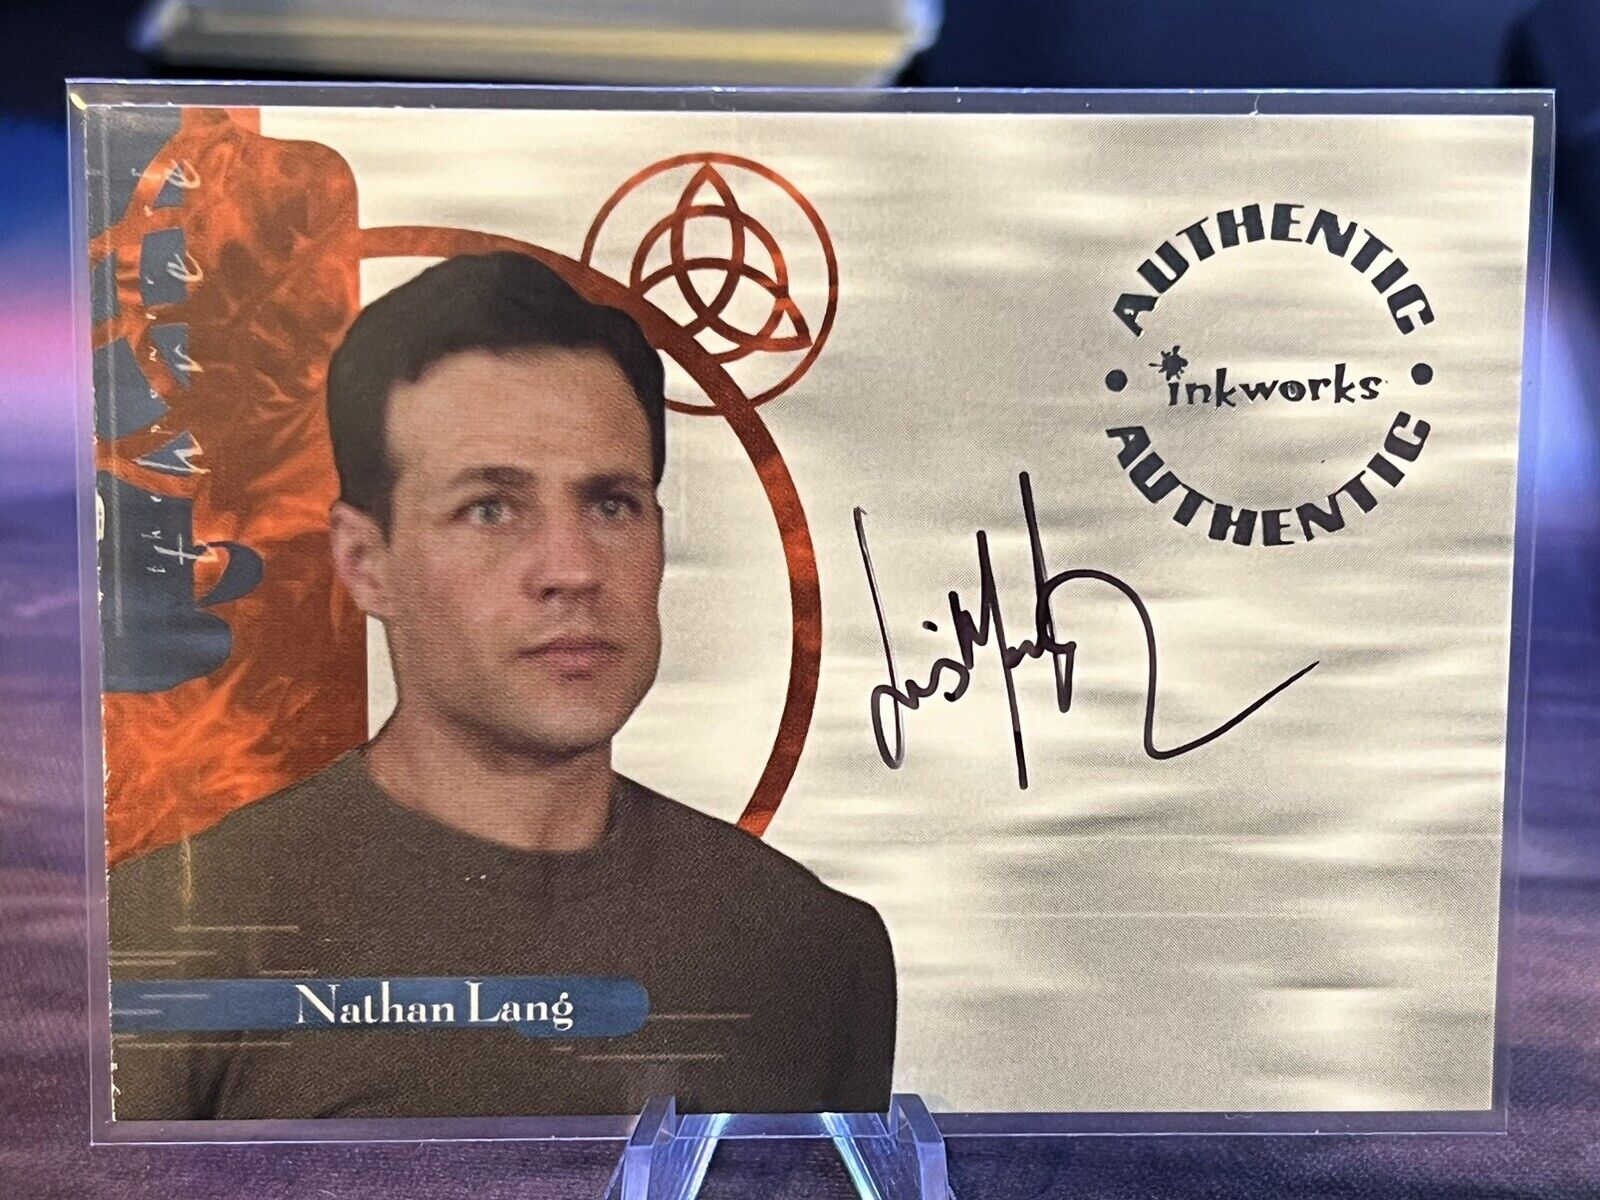 2003 Charmed Louis Mandylor as Nathan Lang Auto Inkworks Autograph #A18